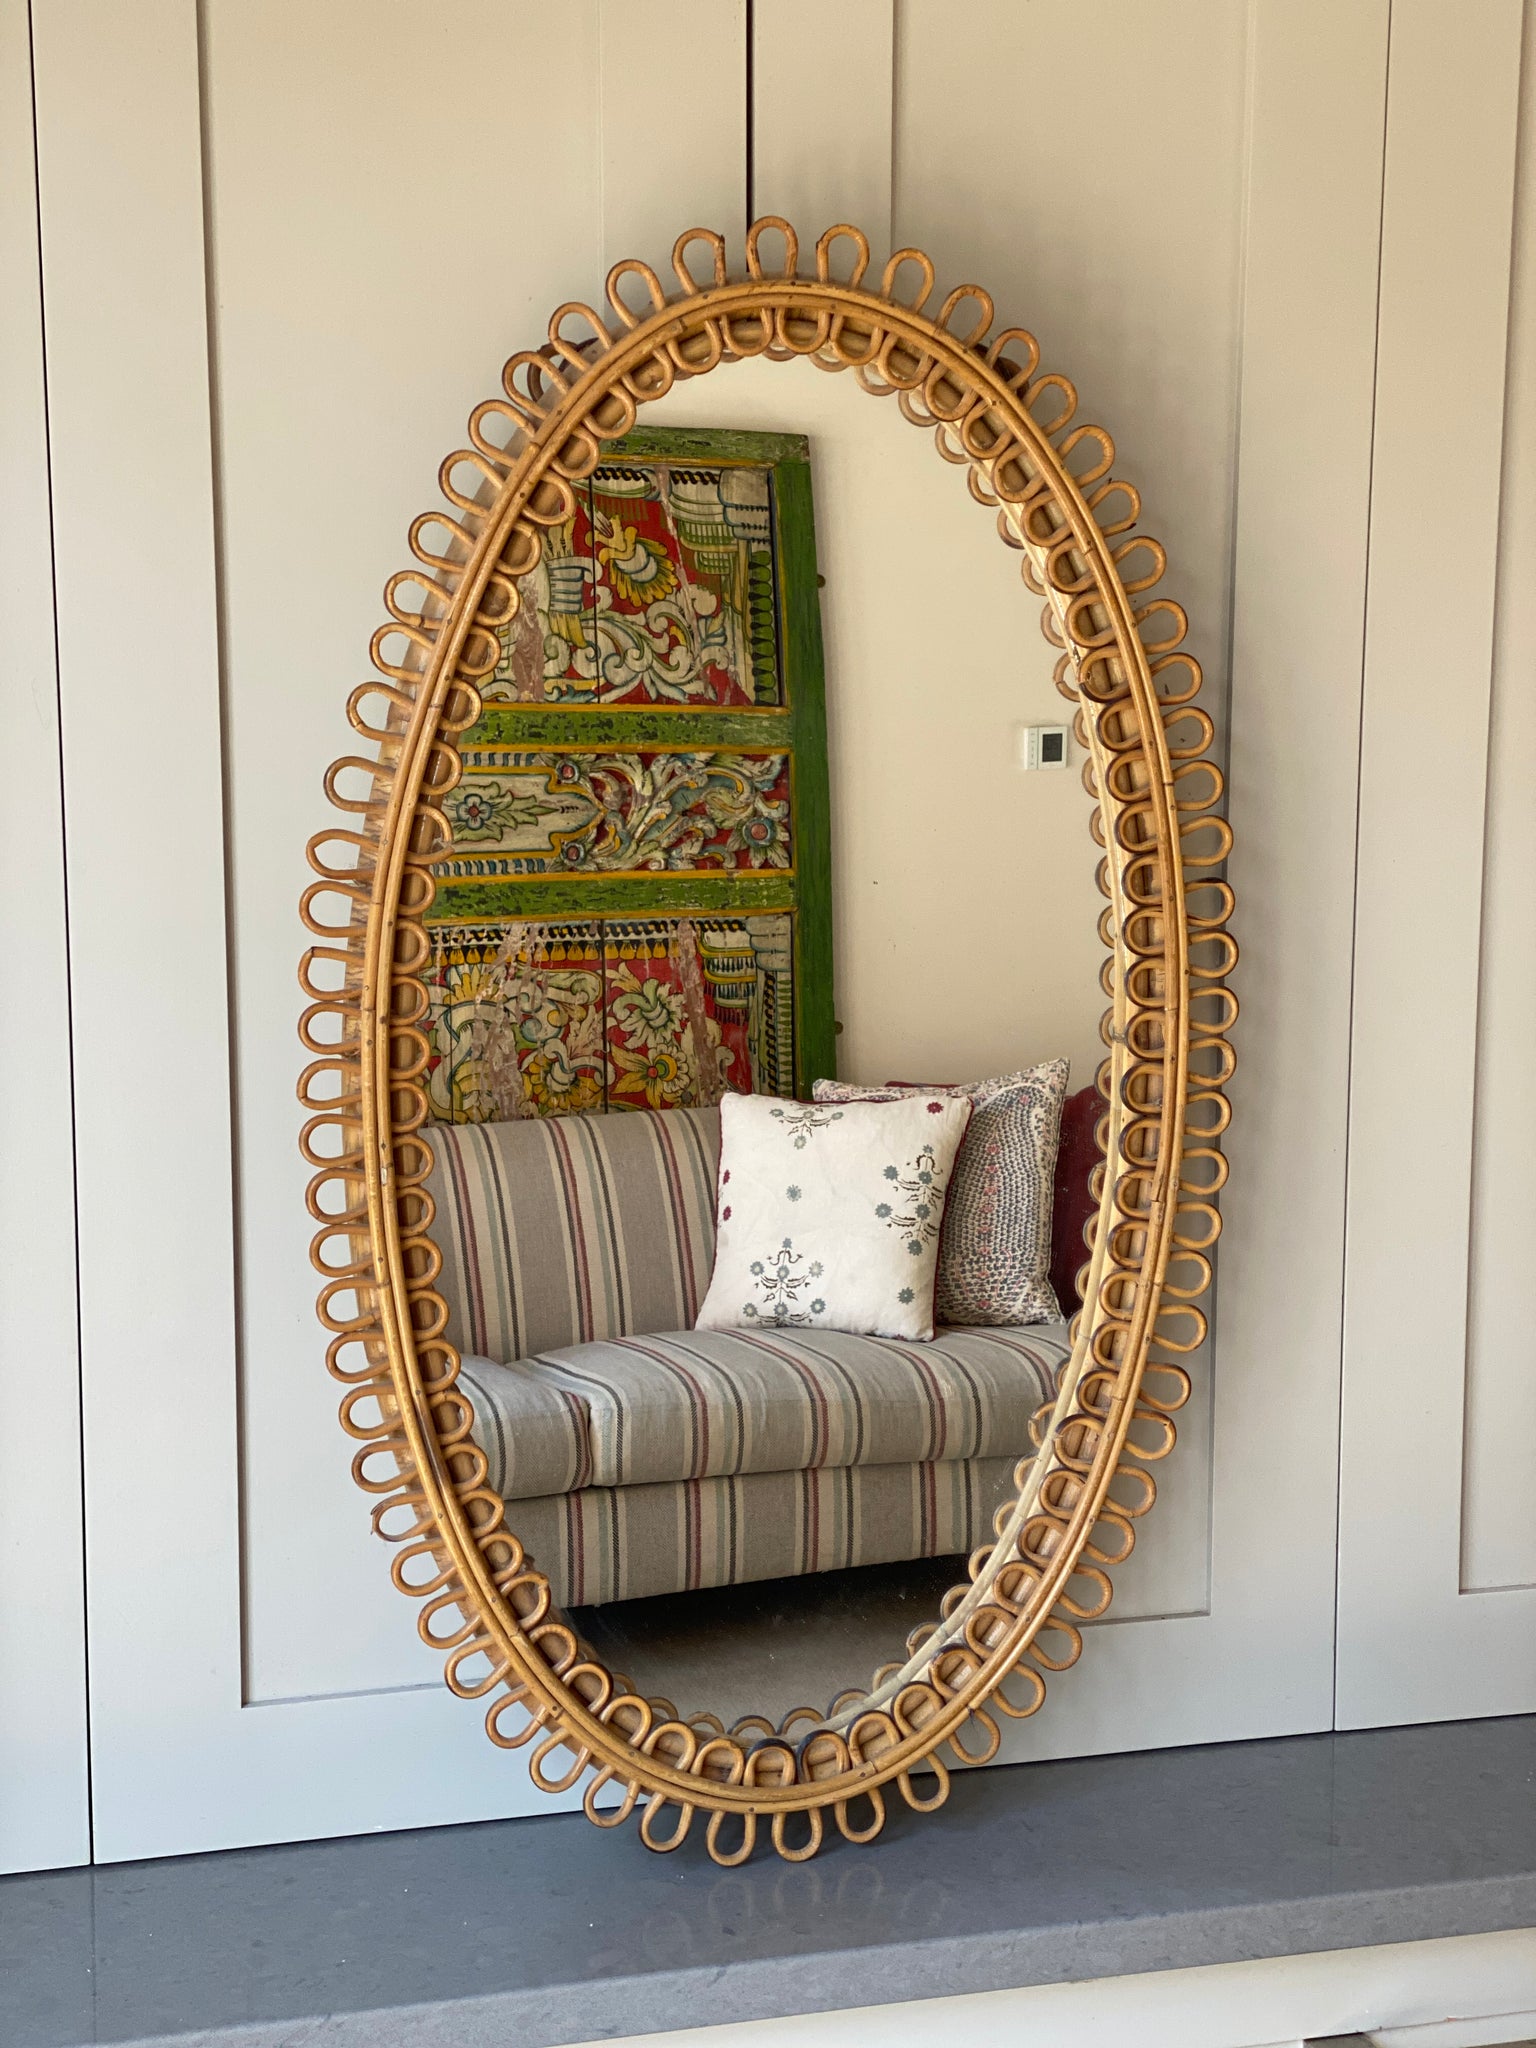 Large Oval Cane Mirror with chain